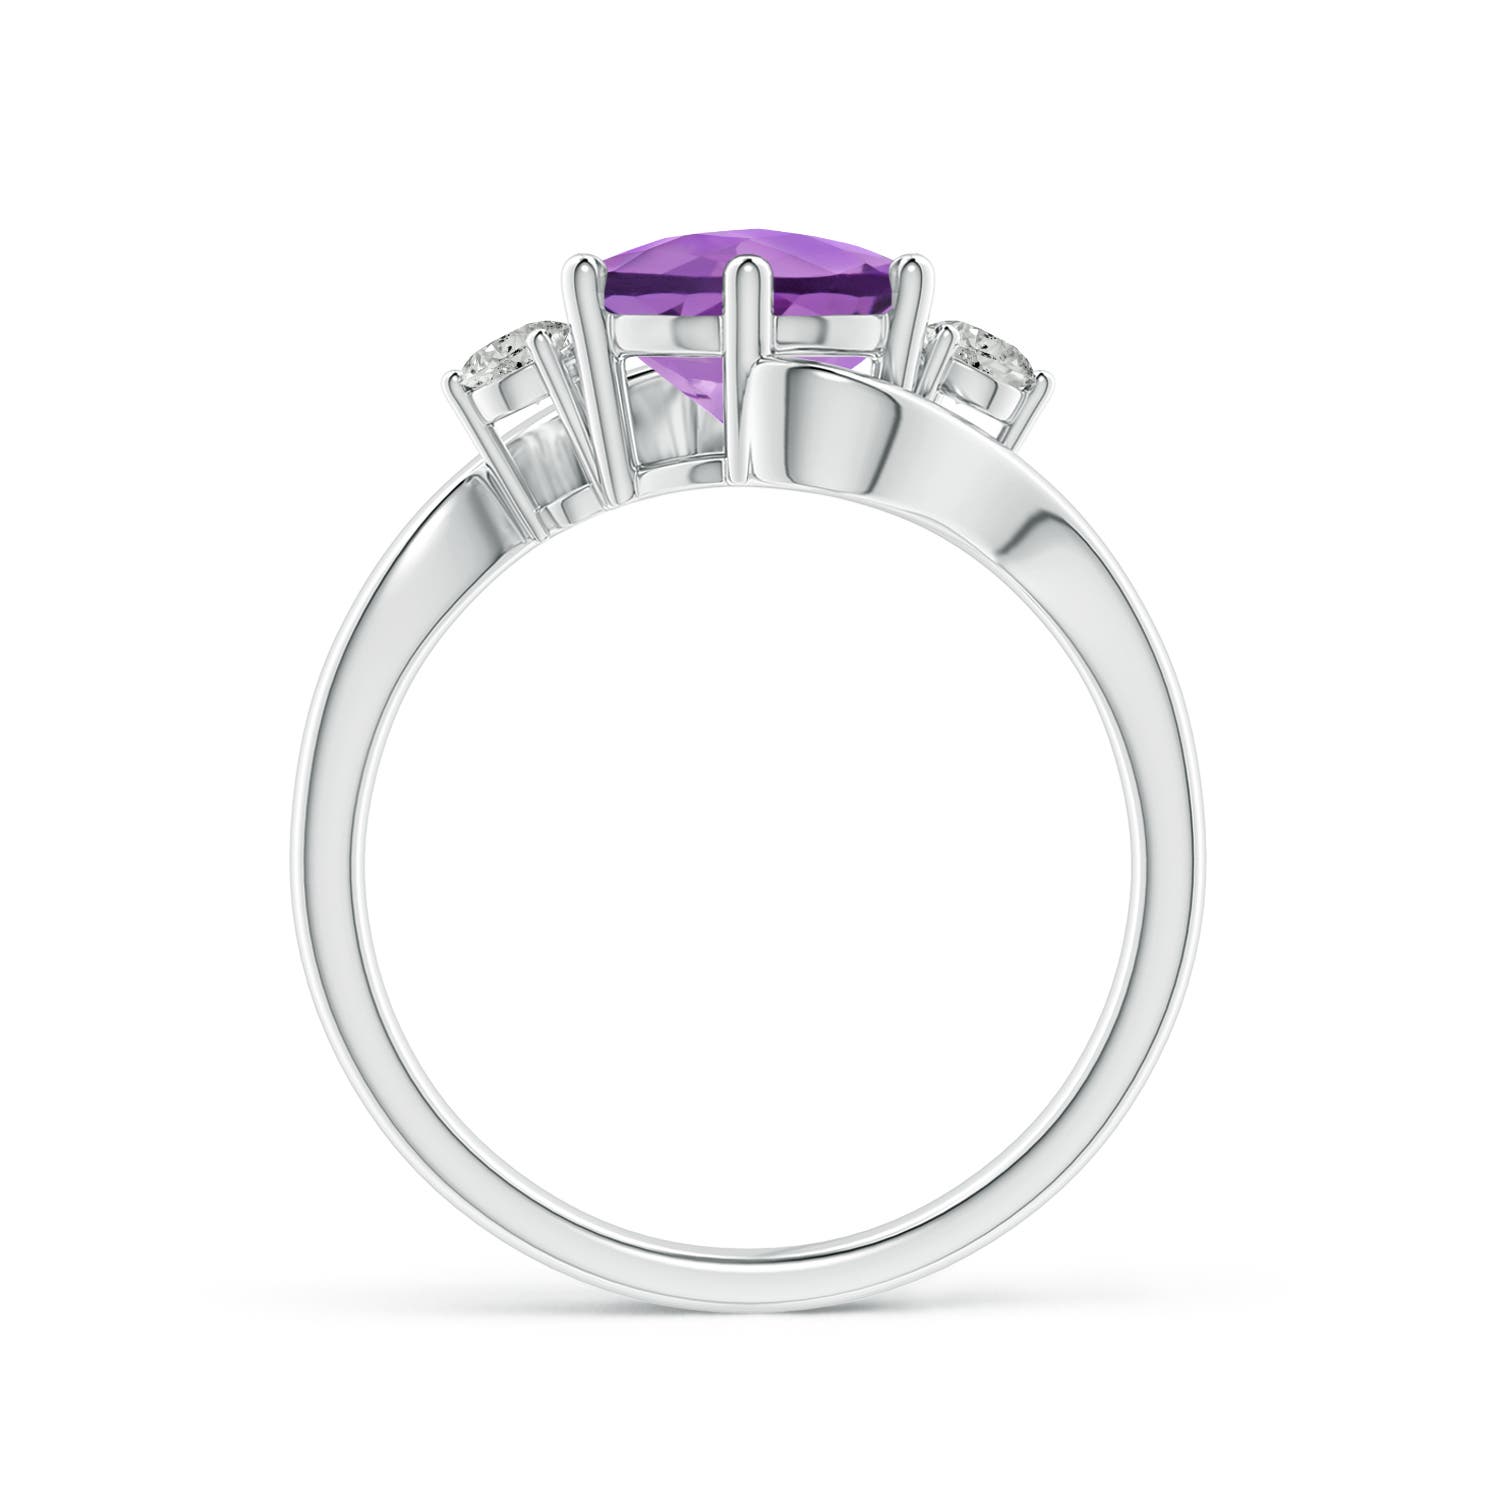 A - Amethyst / 1.84 CT / 14 KT White Gold